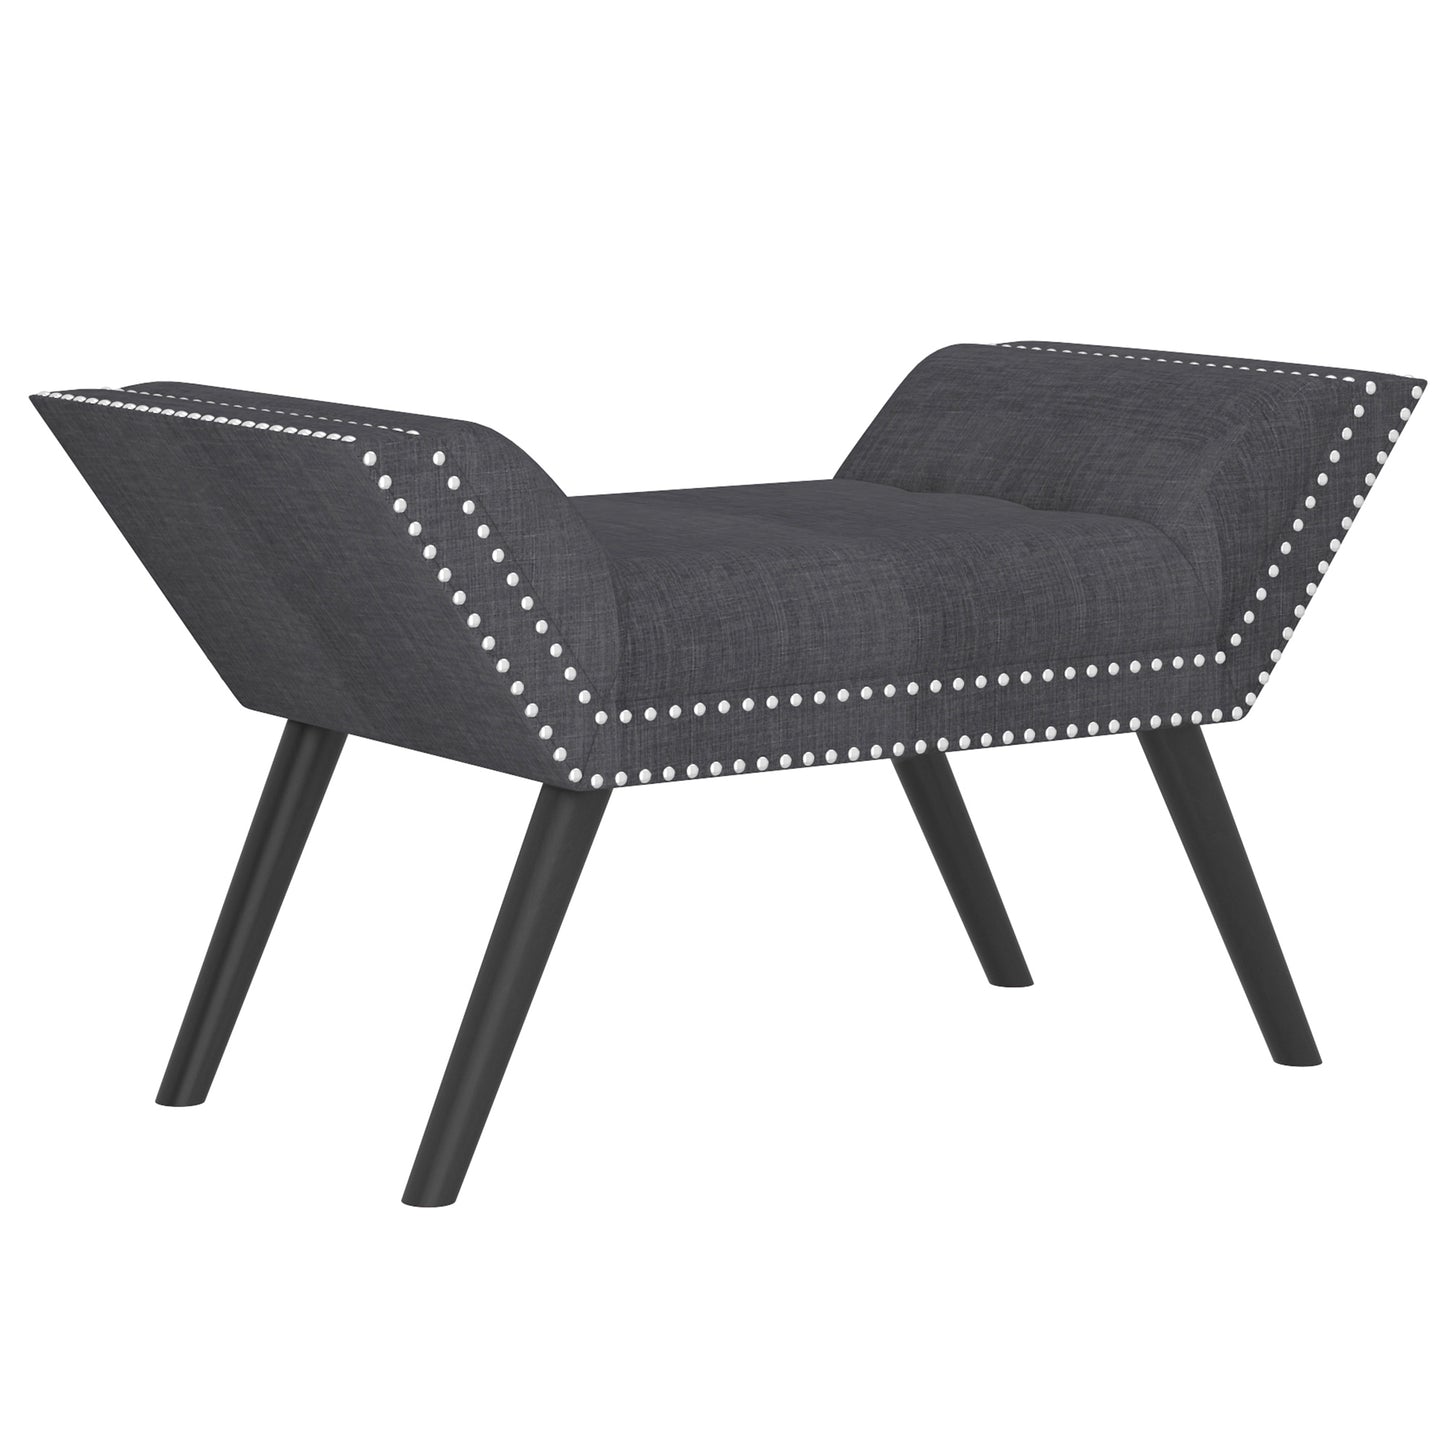 Lana Bench in Grey and Black